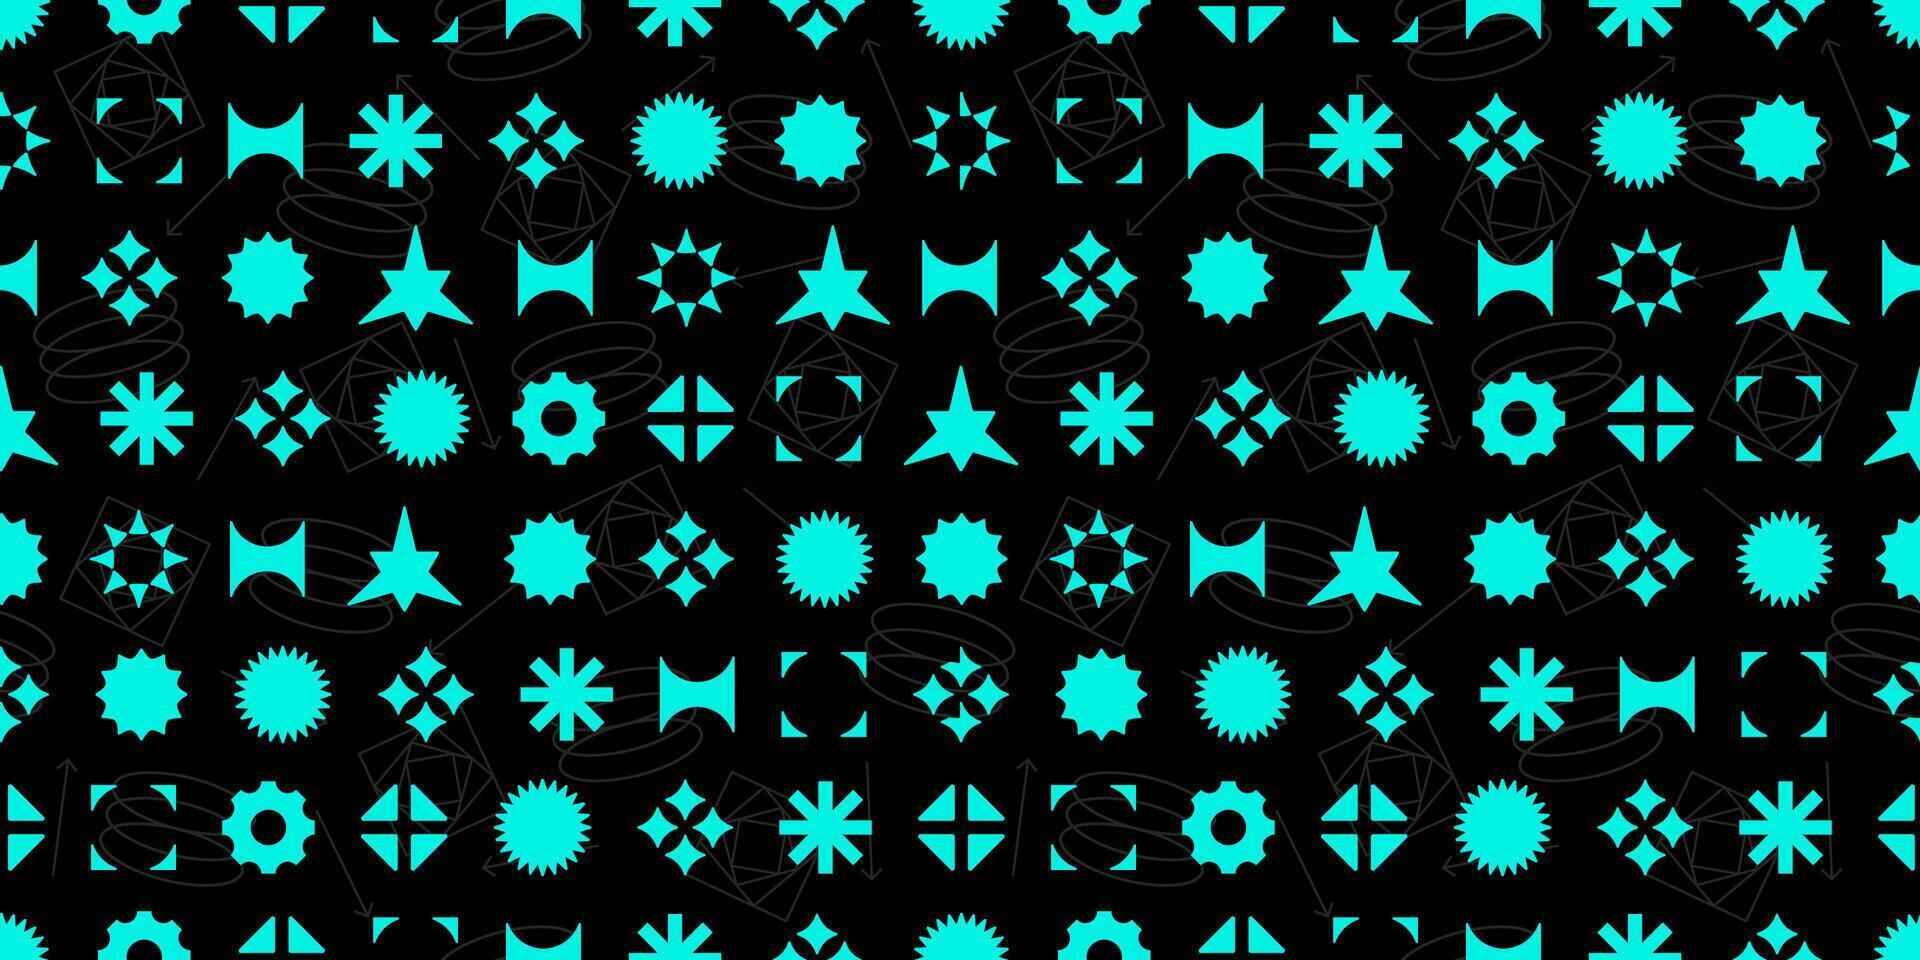 Abstract futuristic shapes seamless repetitive pattern. Vector illustration suitable for prints.